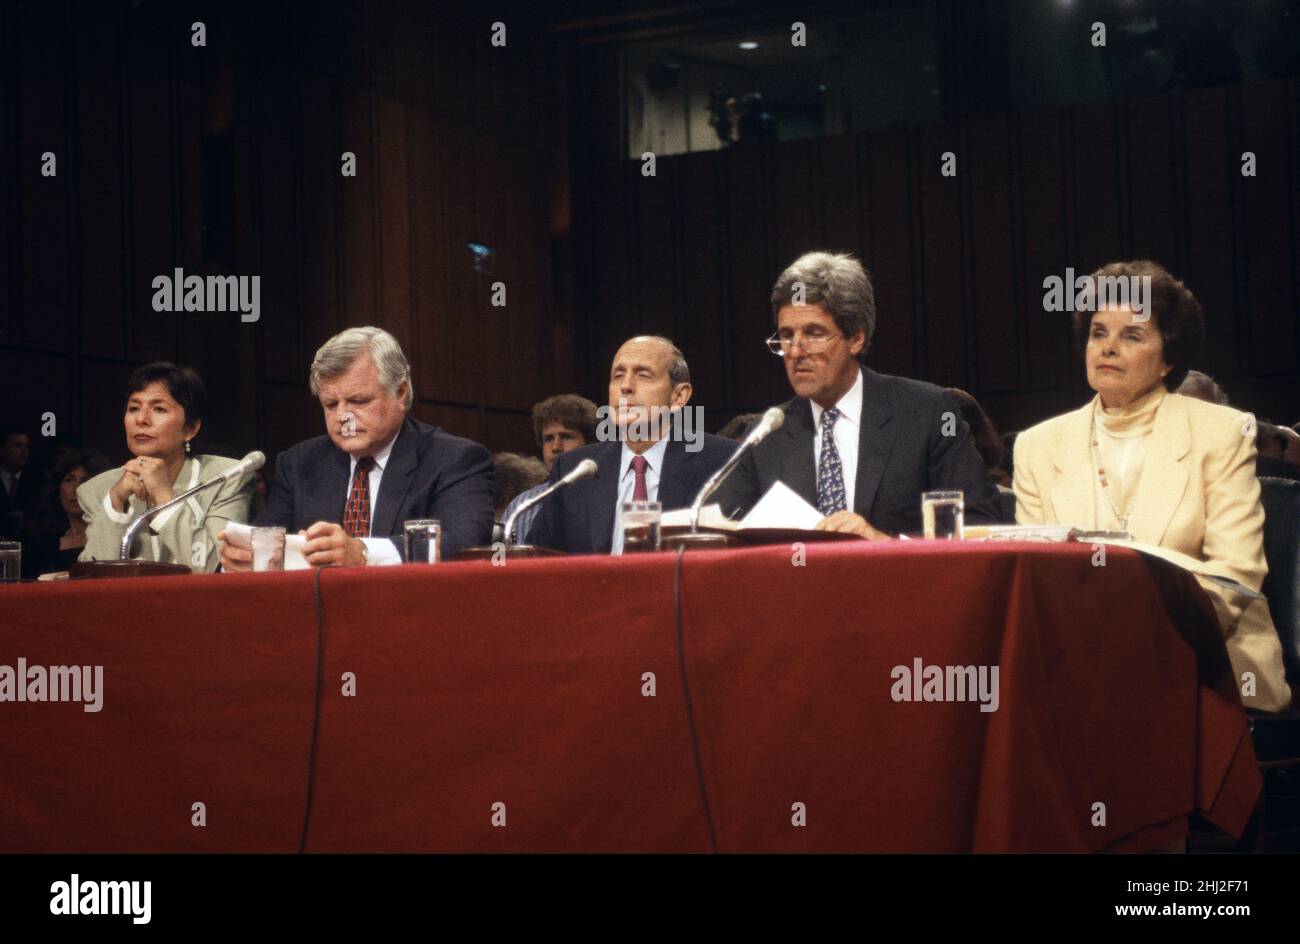 Four United States Senators introduce Chief Judge of the US Court of Appeals for the First Circuit, Stephen G. Breyer, US President Bill Clinton's nominee as Associate Justice of the US Supreme Court to replace the retiring Justice Harry Blackmun, before the US Senate Committee on the Judiciary on Capitol Hill in Washington, DC on July 12, 1994. Pictured from left to right: US Senator Barbara Boxer (Democrat of California), US Senator Edward M. Kennedy (Democrat of Massachusetts), Judge Breyer, US Senator John F. Kerry (Democrat of Massachusetts), and US Senator Dianne Feinstein (Democrat of C Stock Photo